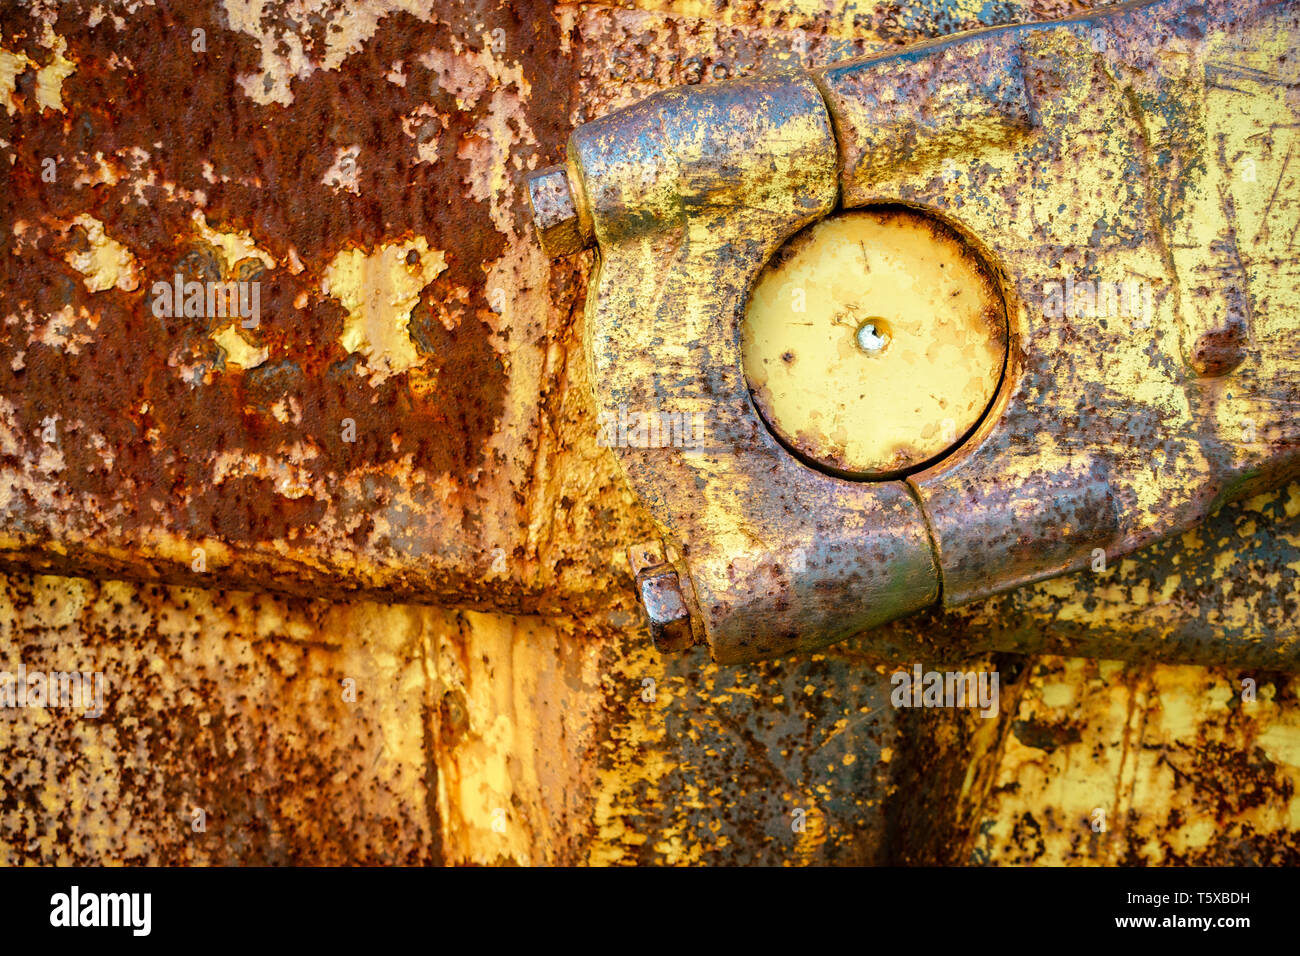 Close-up image of rusted machinery part Stock Photo